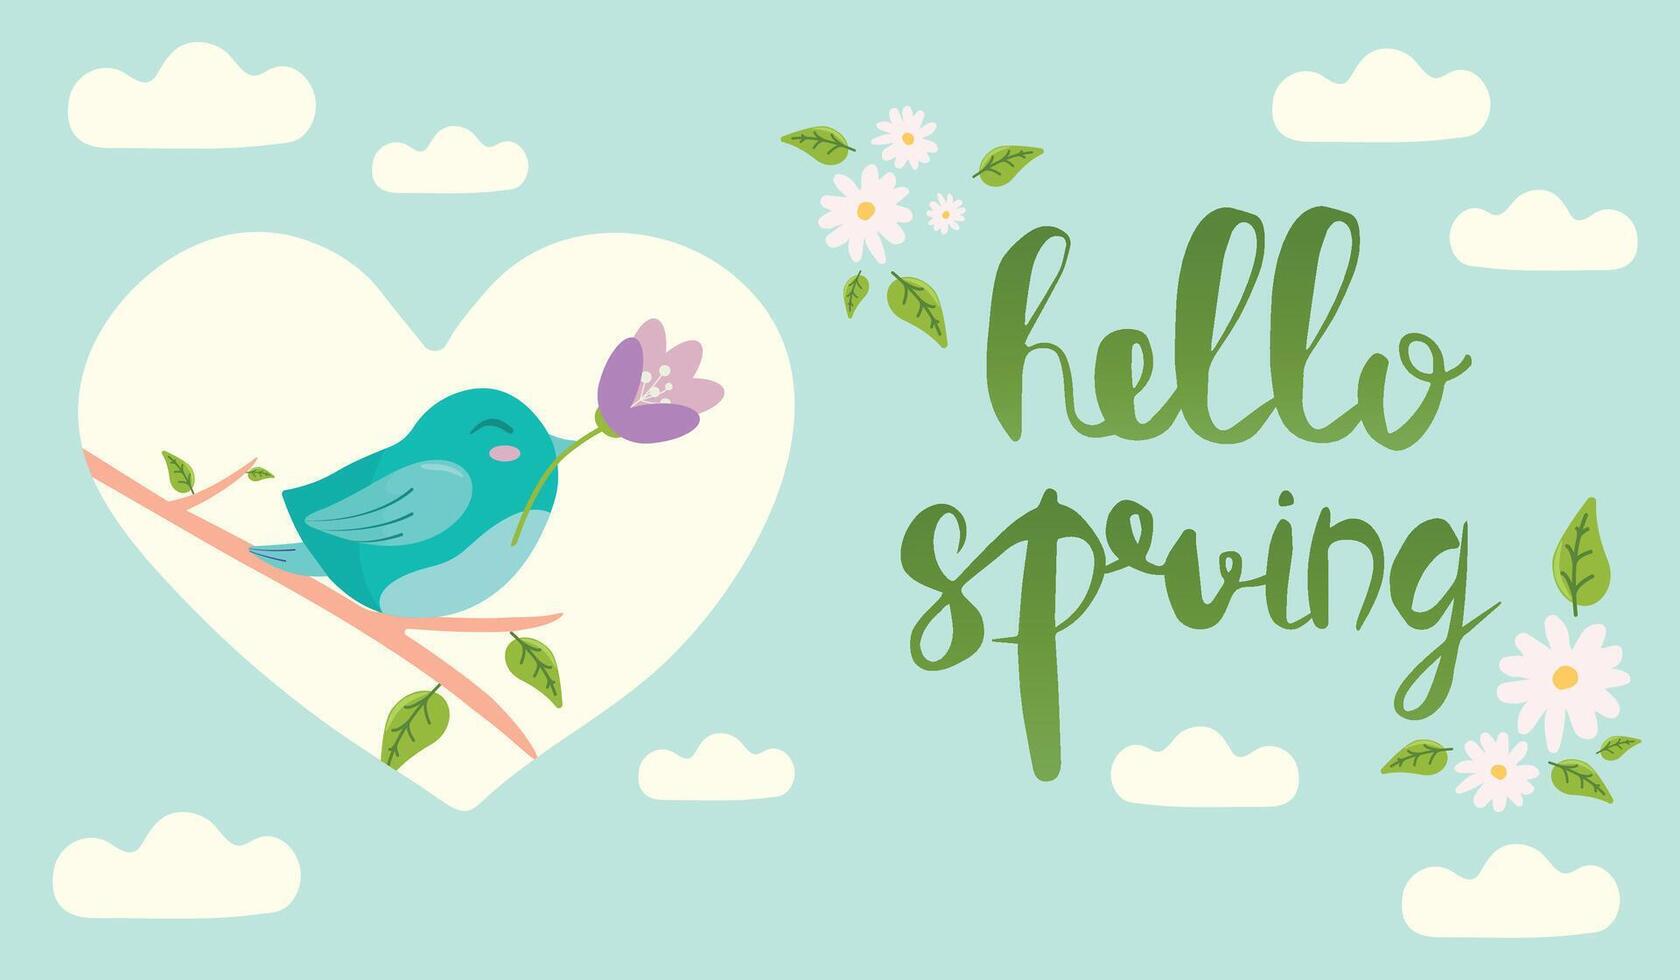 Hello Spring hand drawn illustration. Season lettering with bird holding and a flower. Poster in flat style. vector